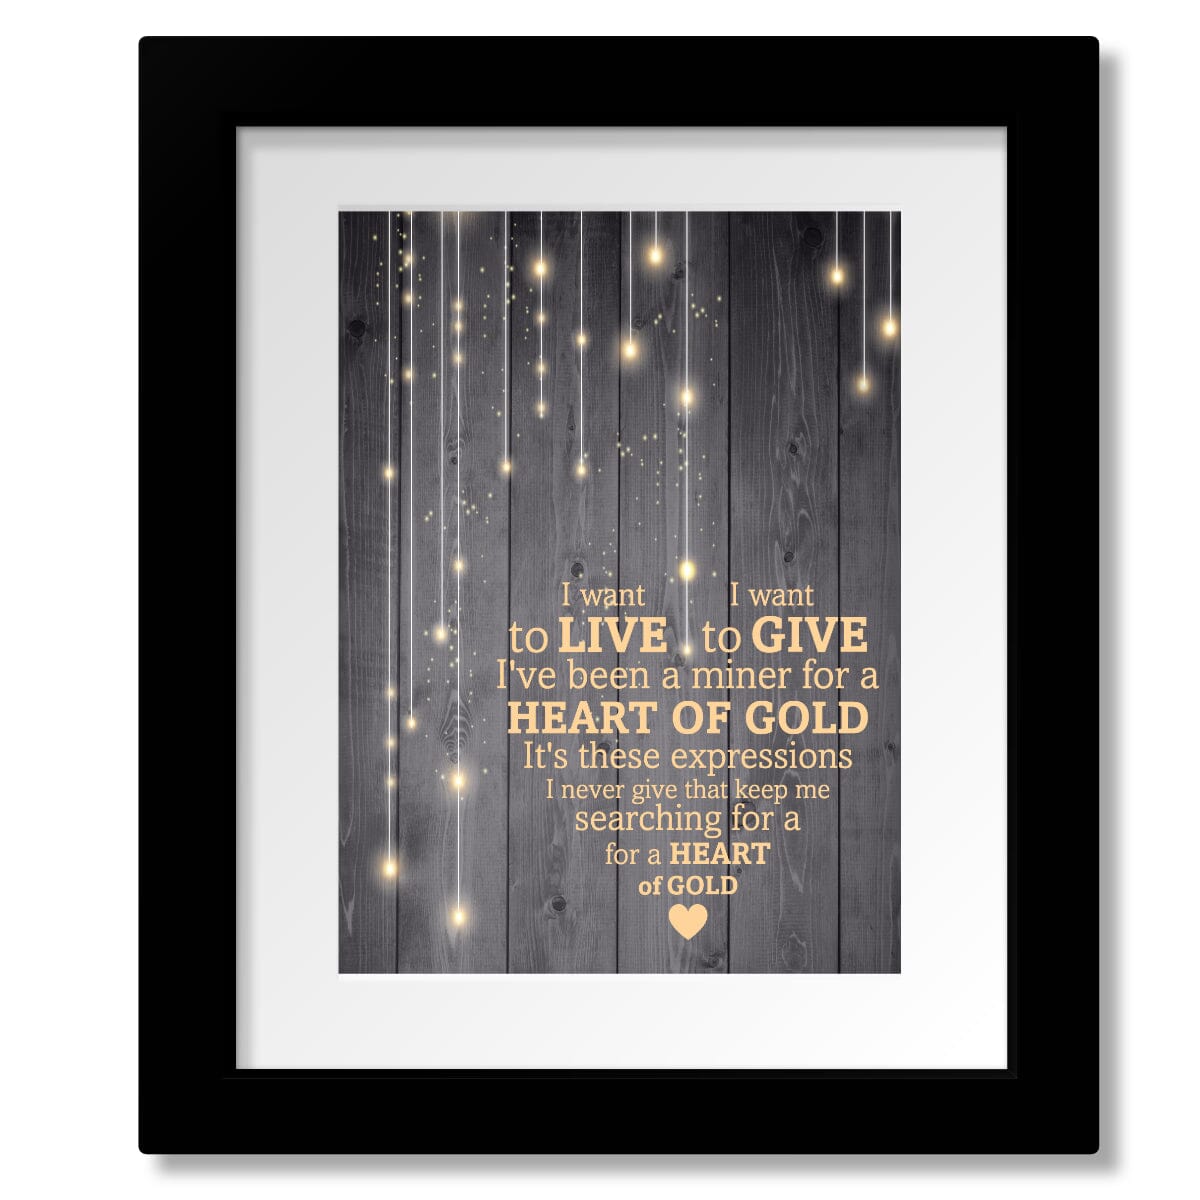 Heart of Gold by Neil Young - Lyric Song Art Wall Print Song Lyrics Art Song Lyrics Art 8x10 Matted and Framed Print 